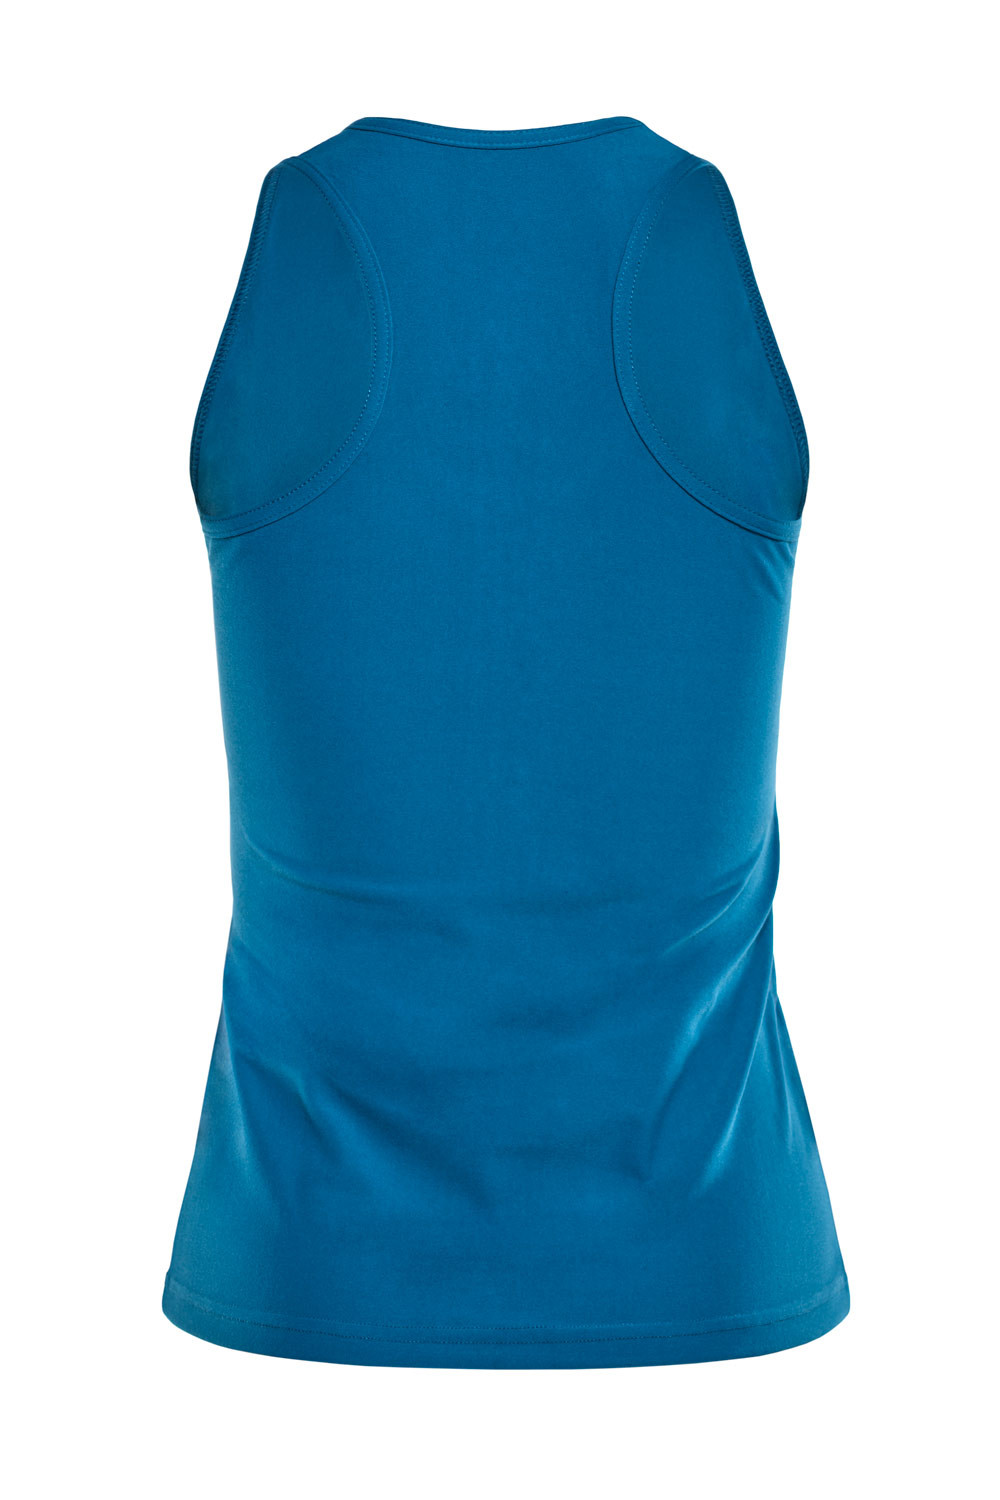 Functional Light and AET124LS, Tanktop Soft Style Winshape teal Soft green, Ultra